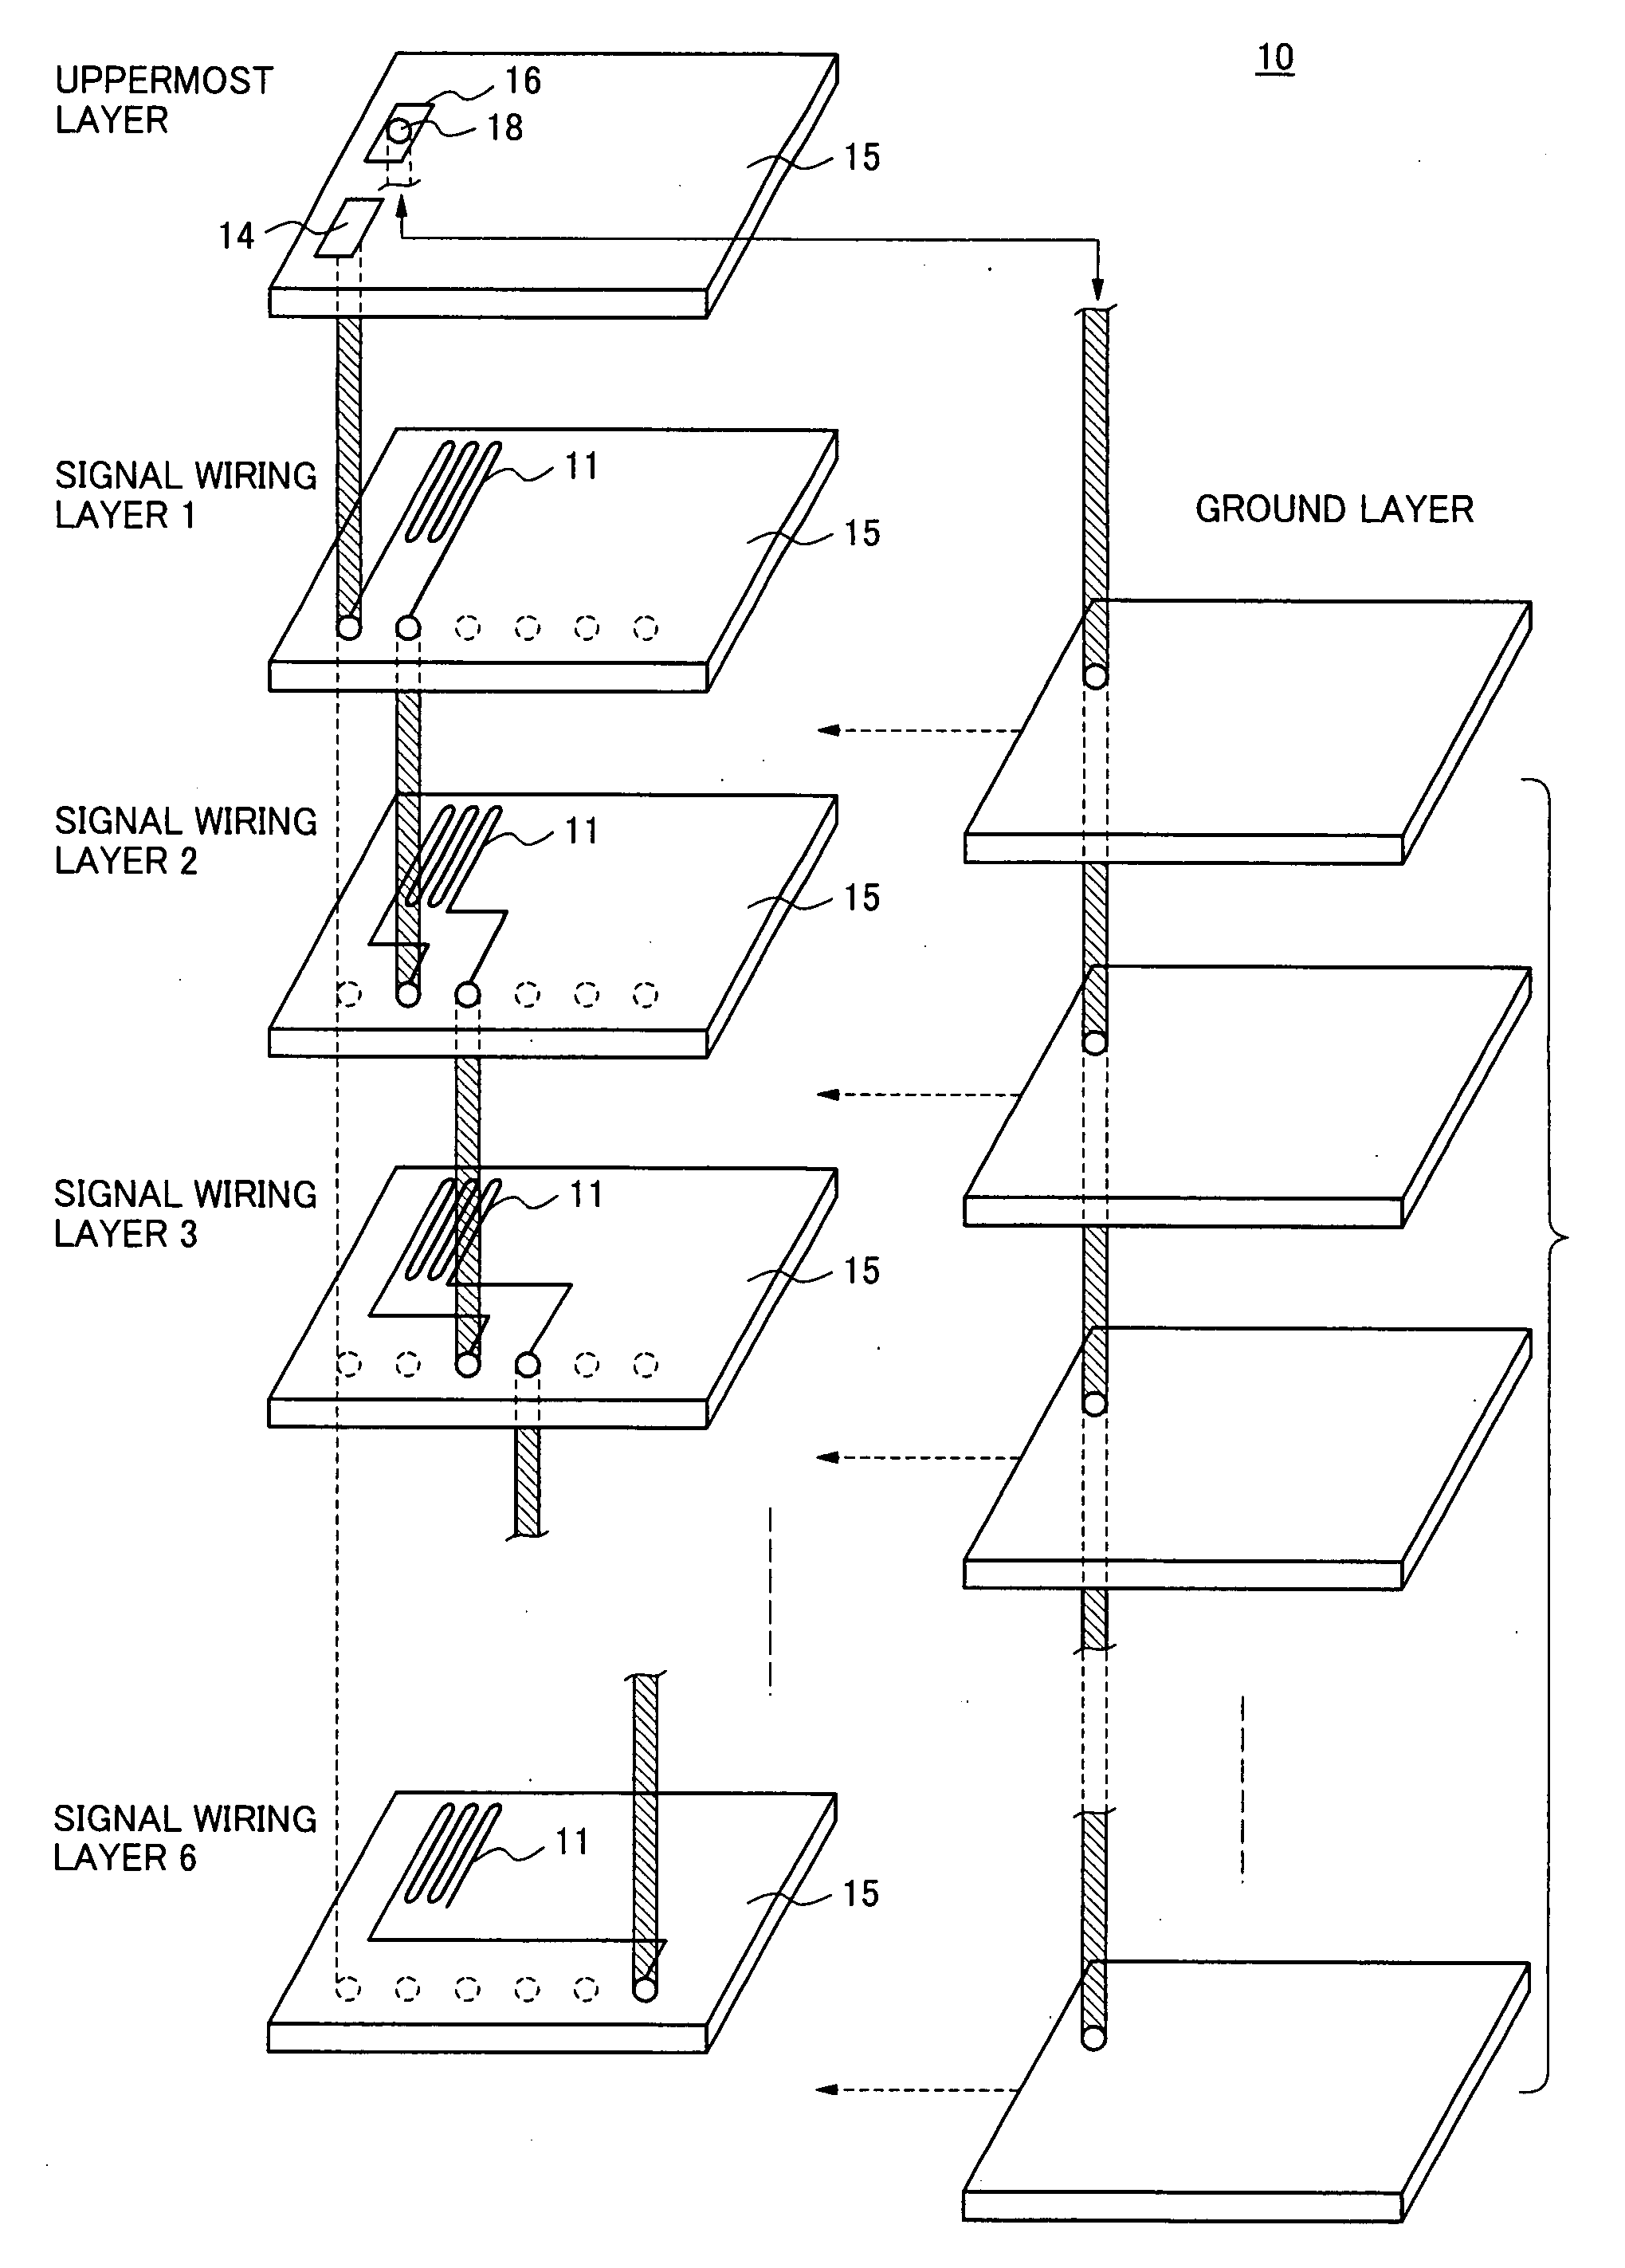 Multilayer printed wiring board and method of measuring characteristic impedance